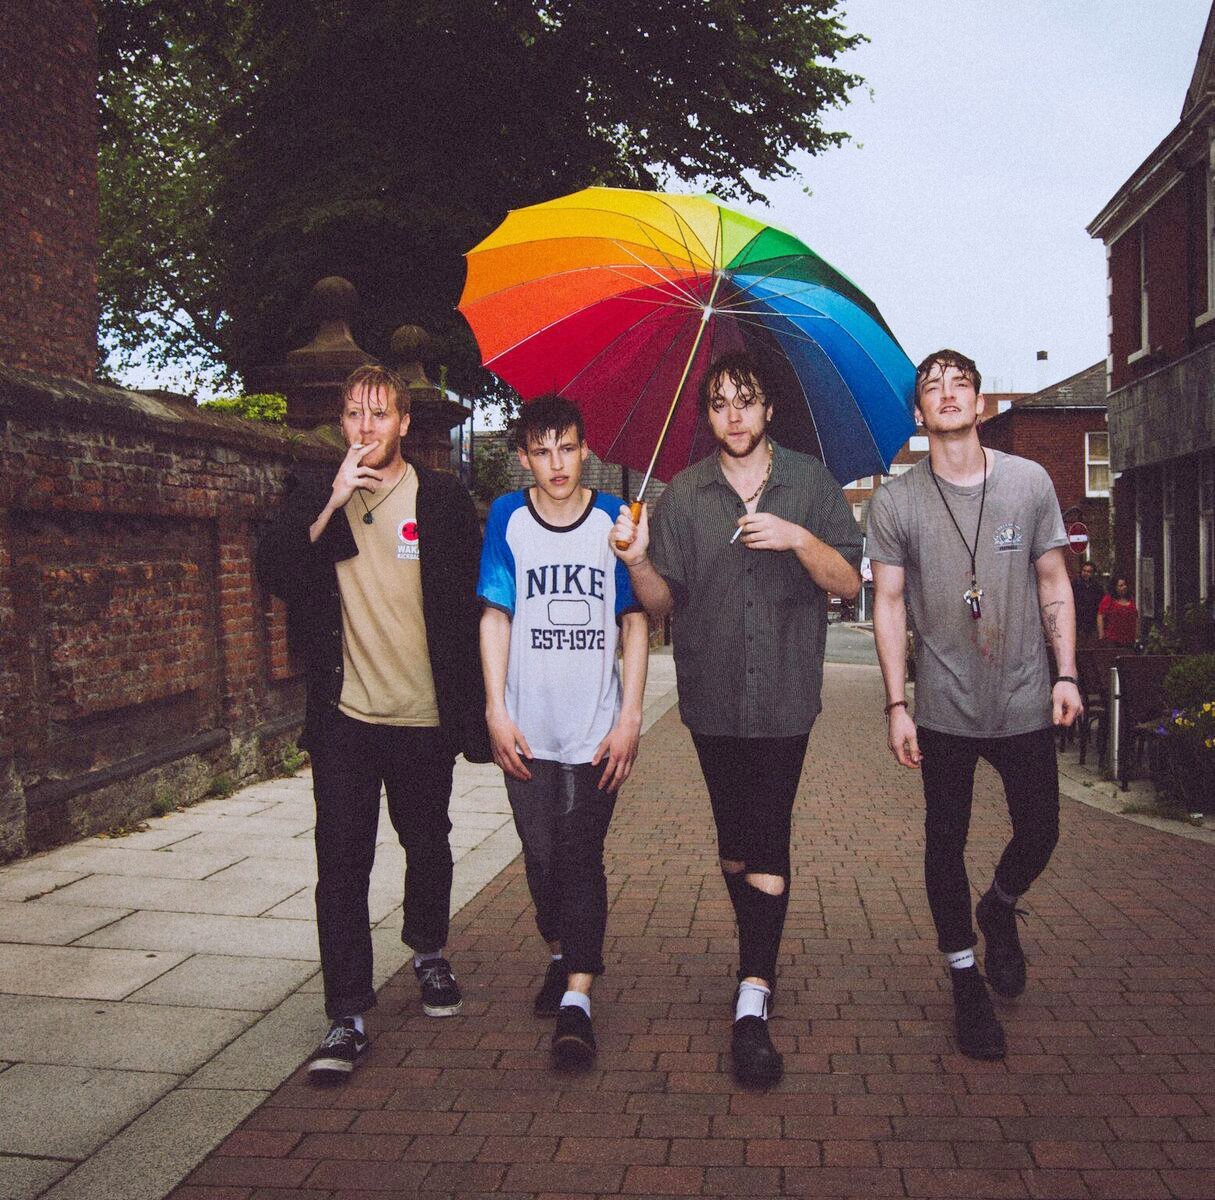 UPDATED 3.40pm: Inquest hears questions remain after deaths of band Viola Beach and manager Craig Tarry